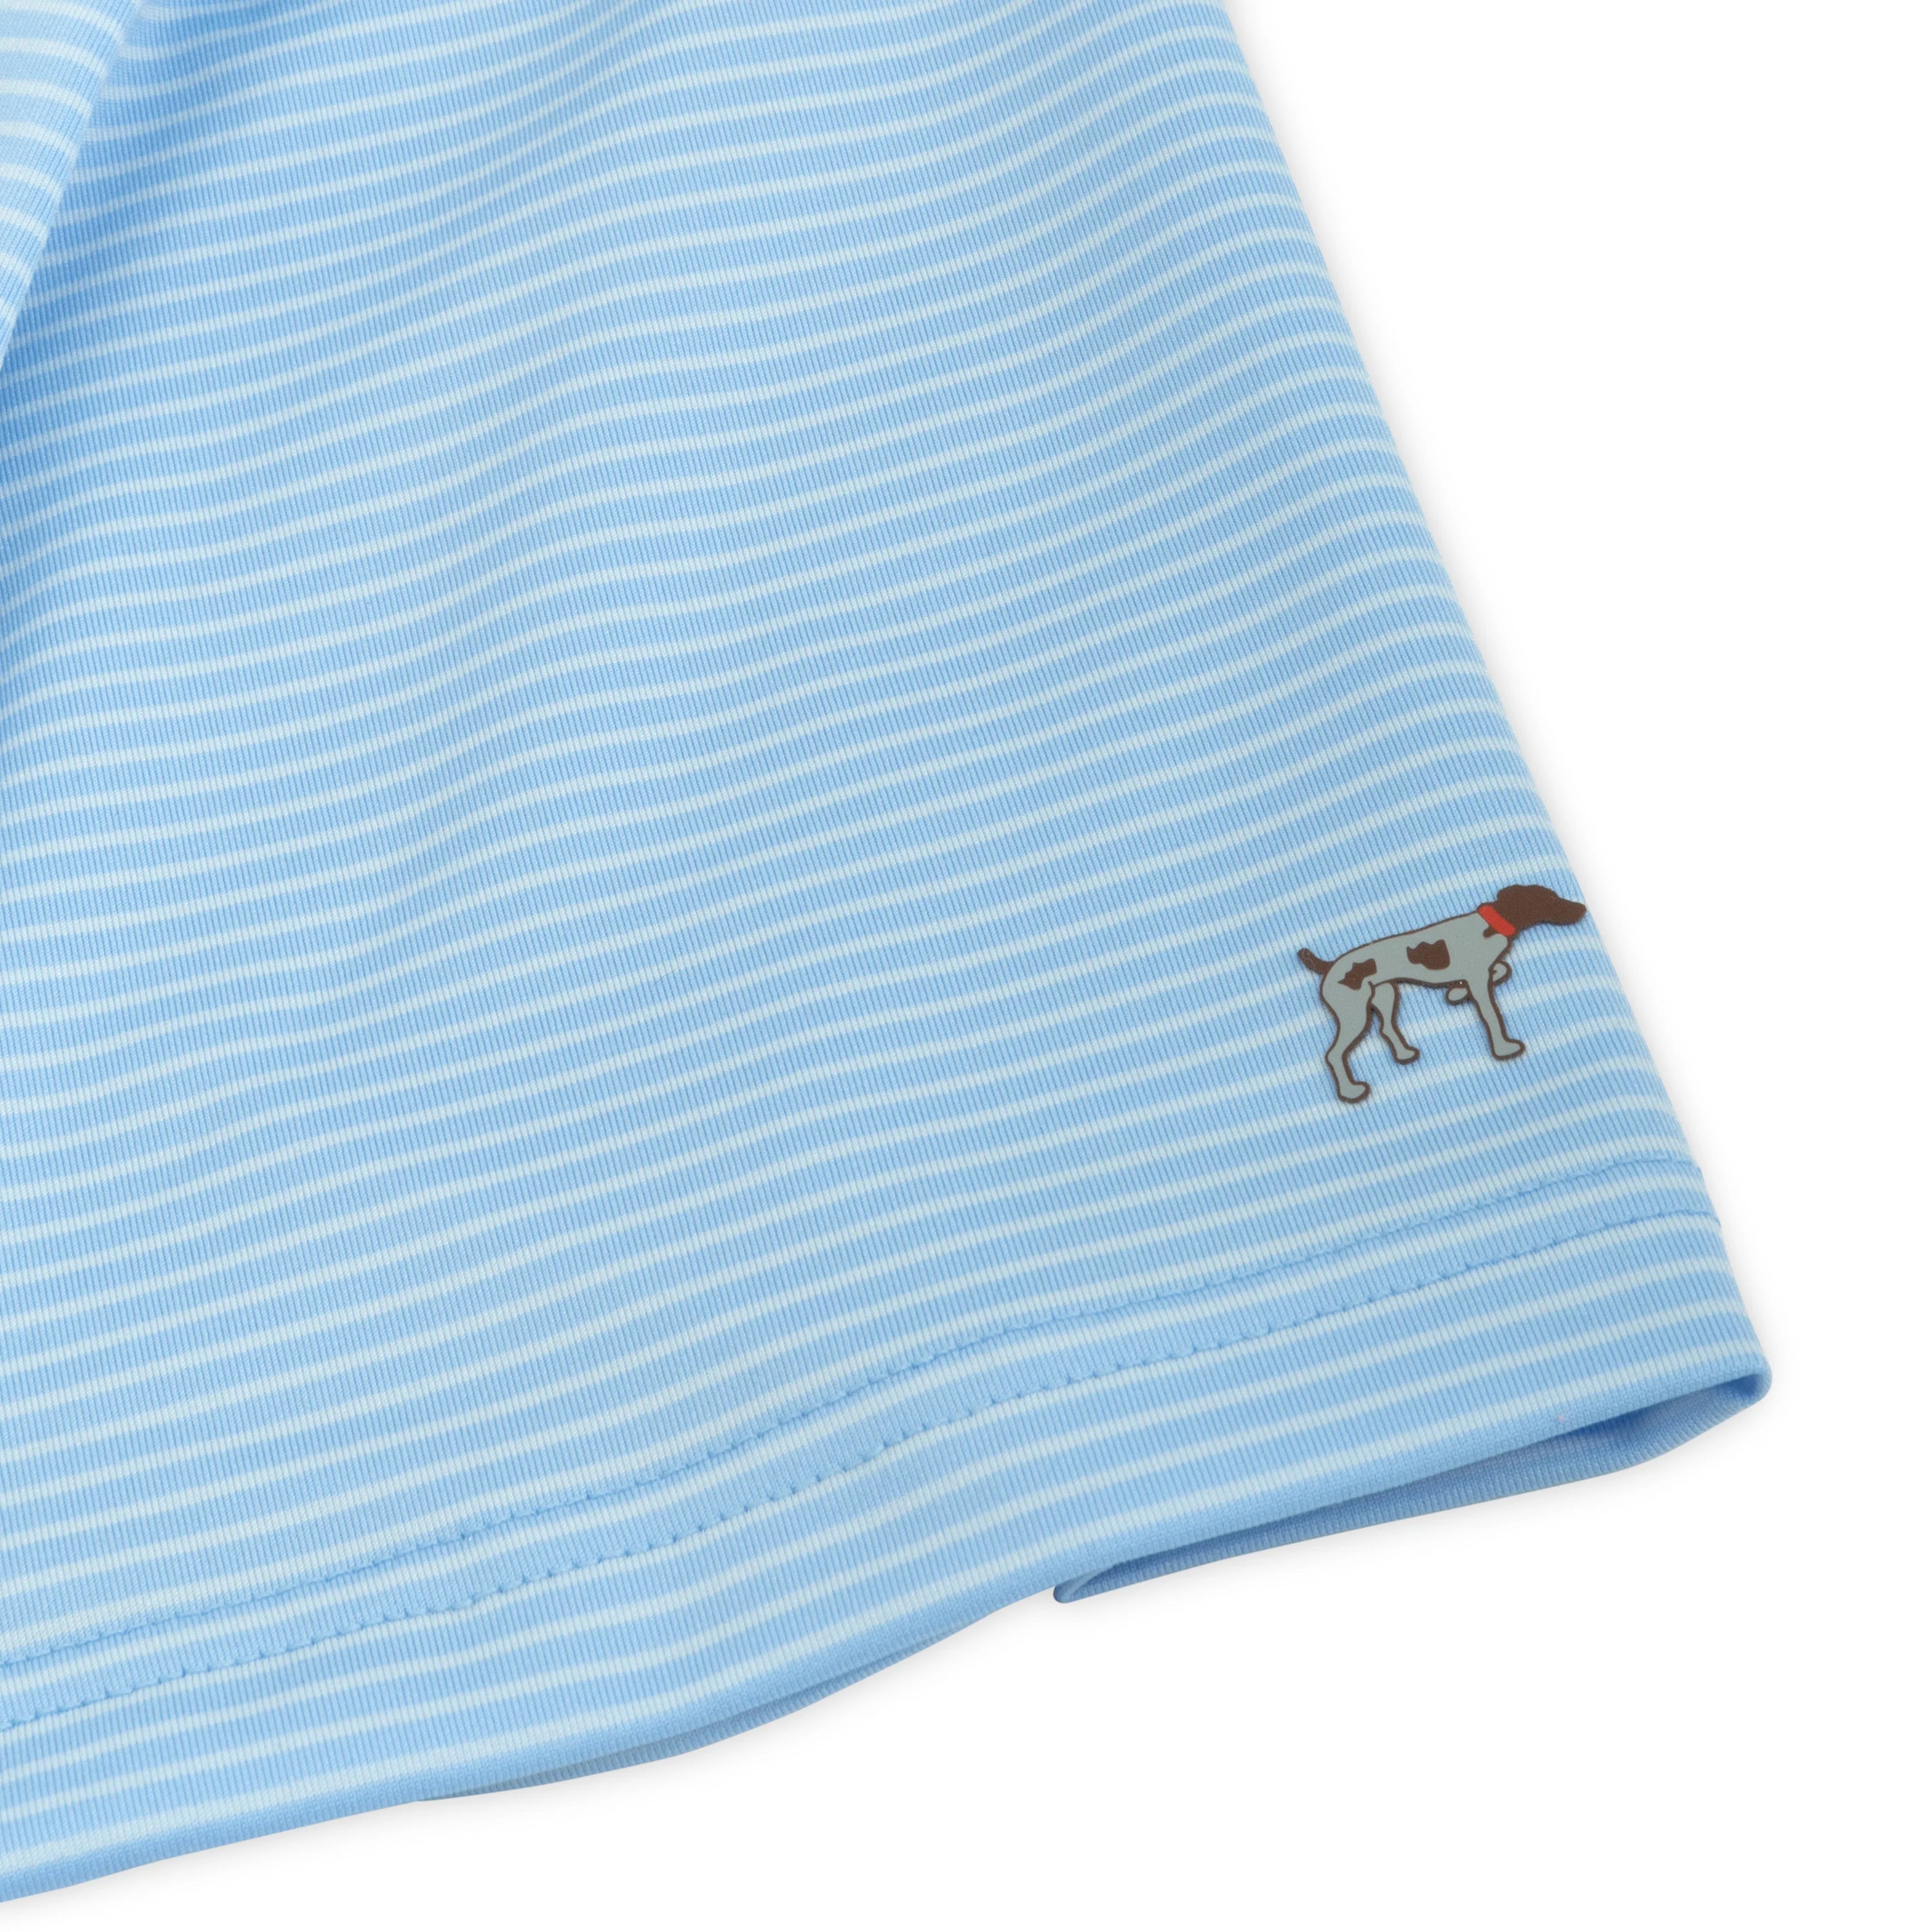 Dune Stripe Polo in Powder Blue & River Blue Polo by Southern Point Co.